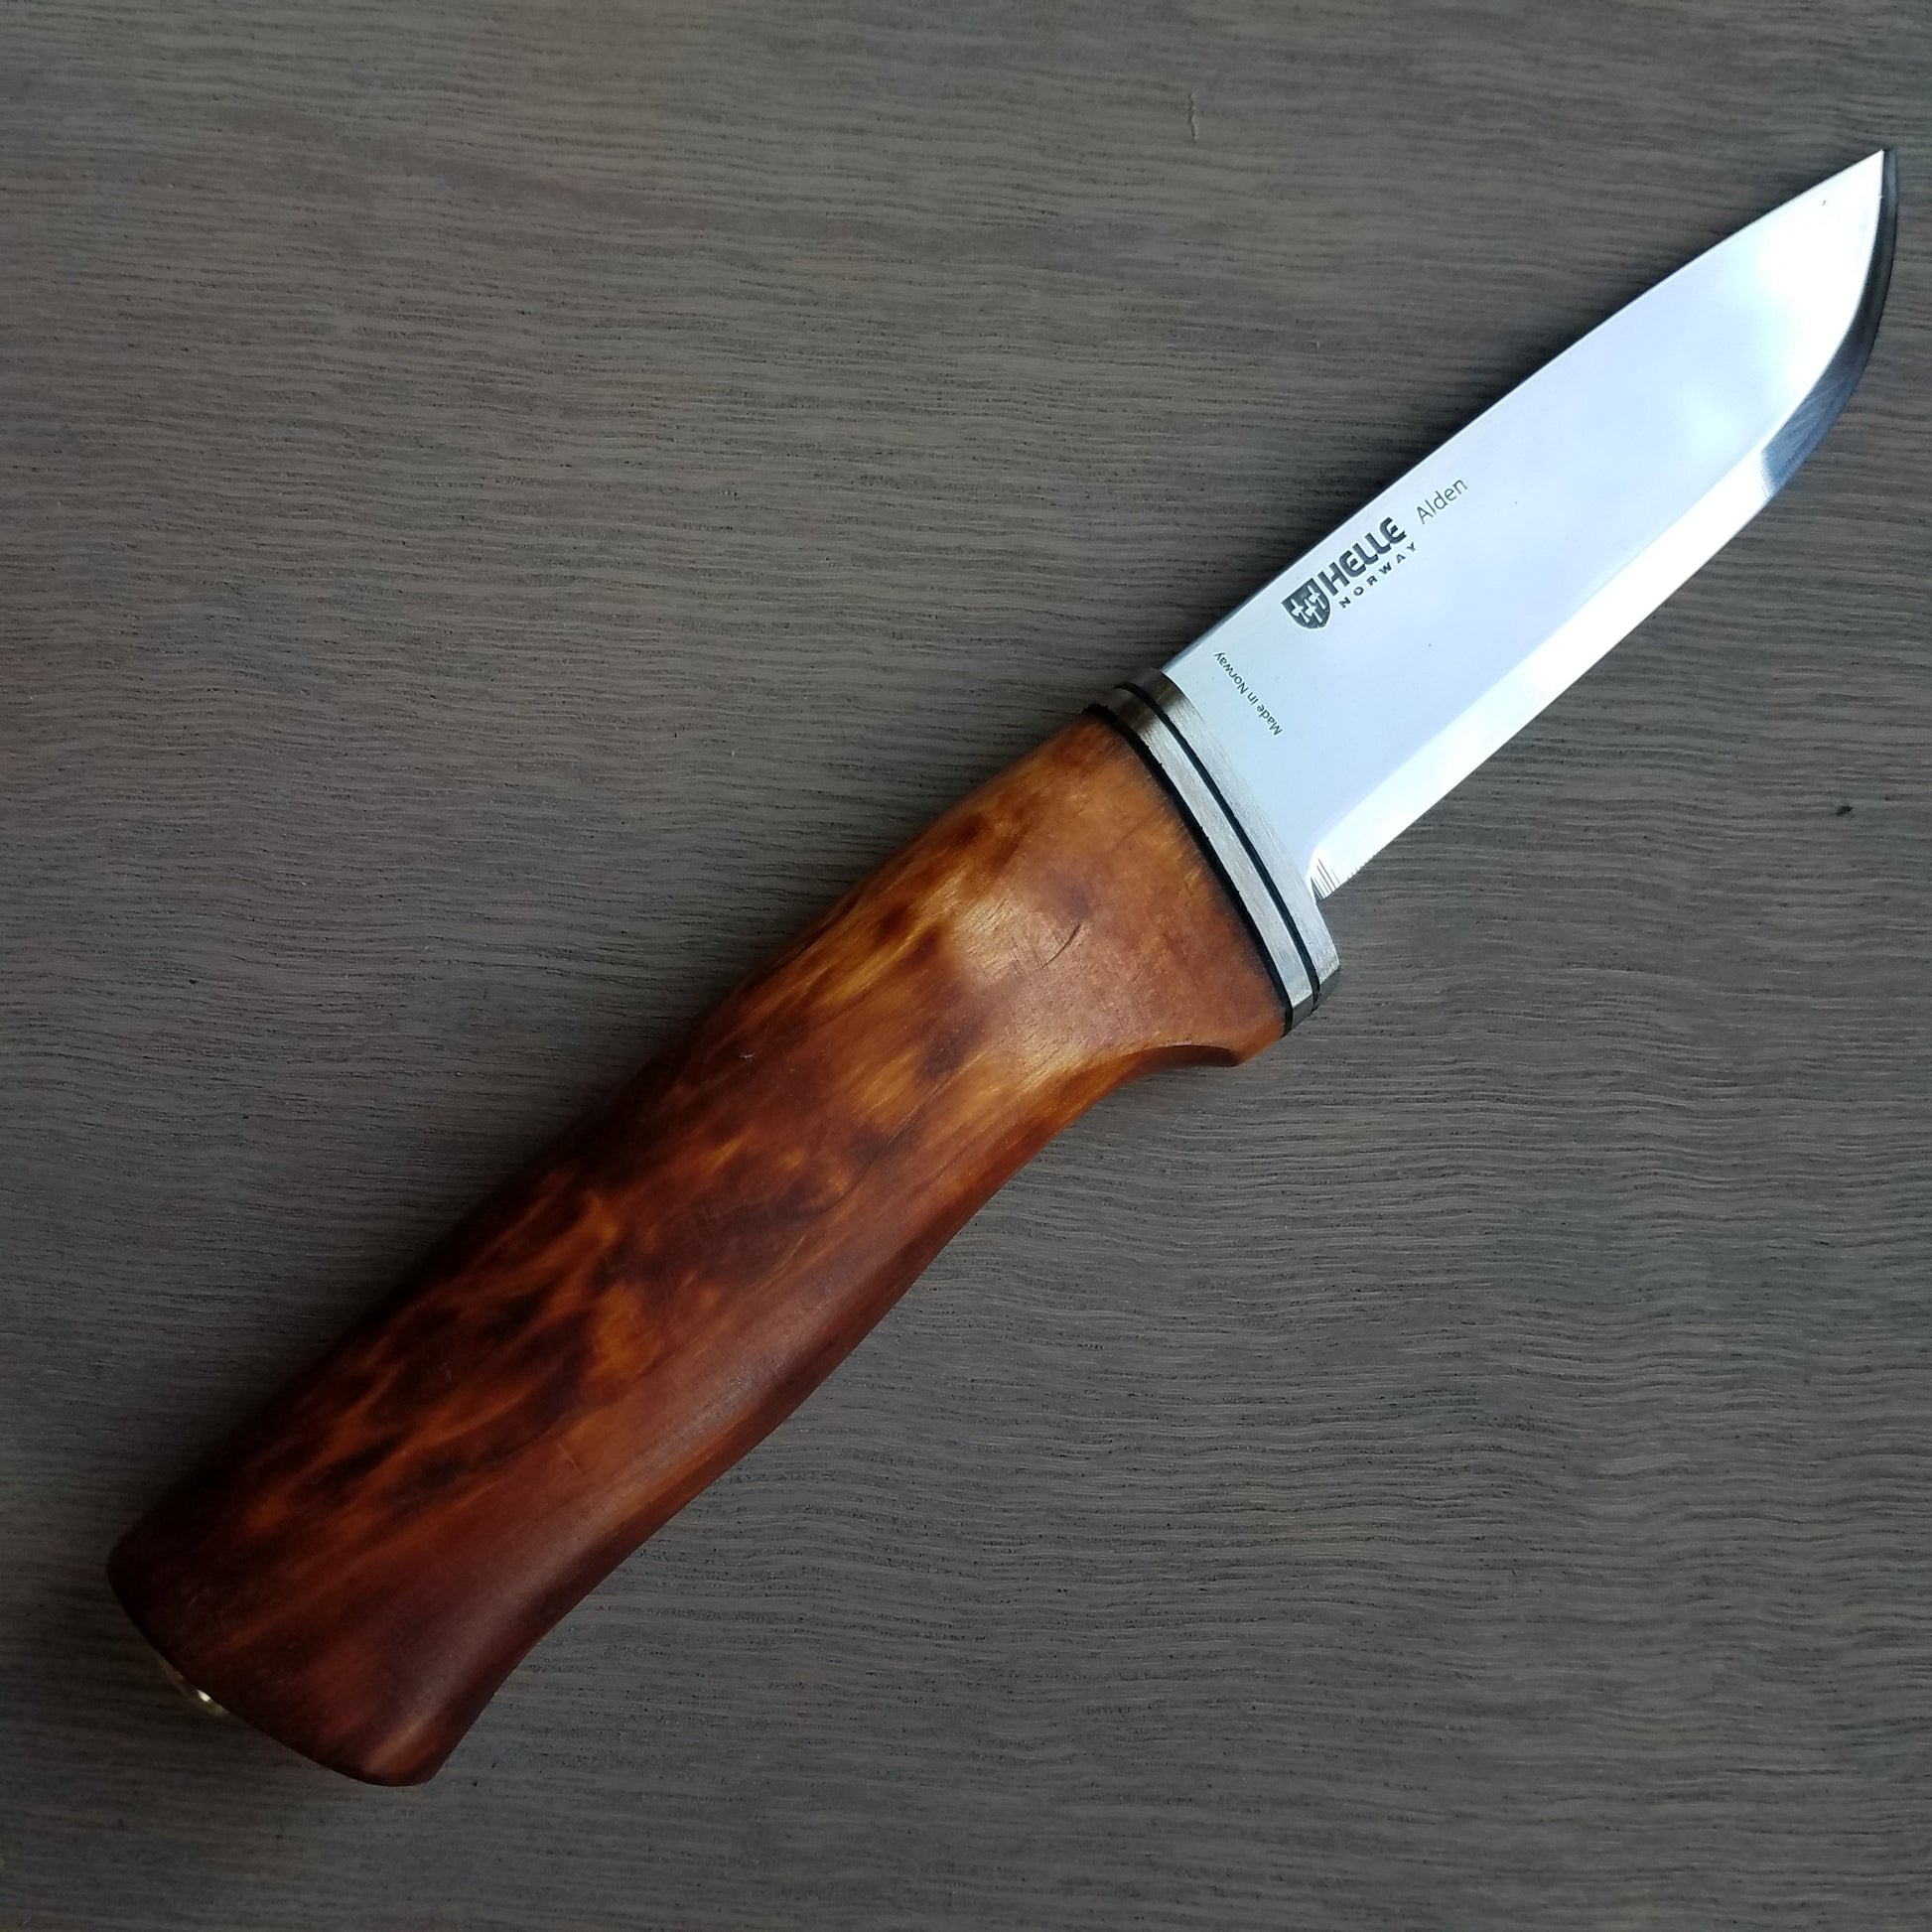 Helle Knives: Dele - Outdoor Chef Knife - Polished 12C27 Stainless - Curly  Birch